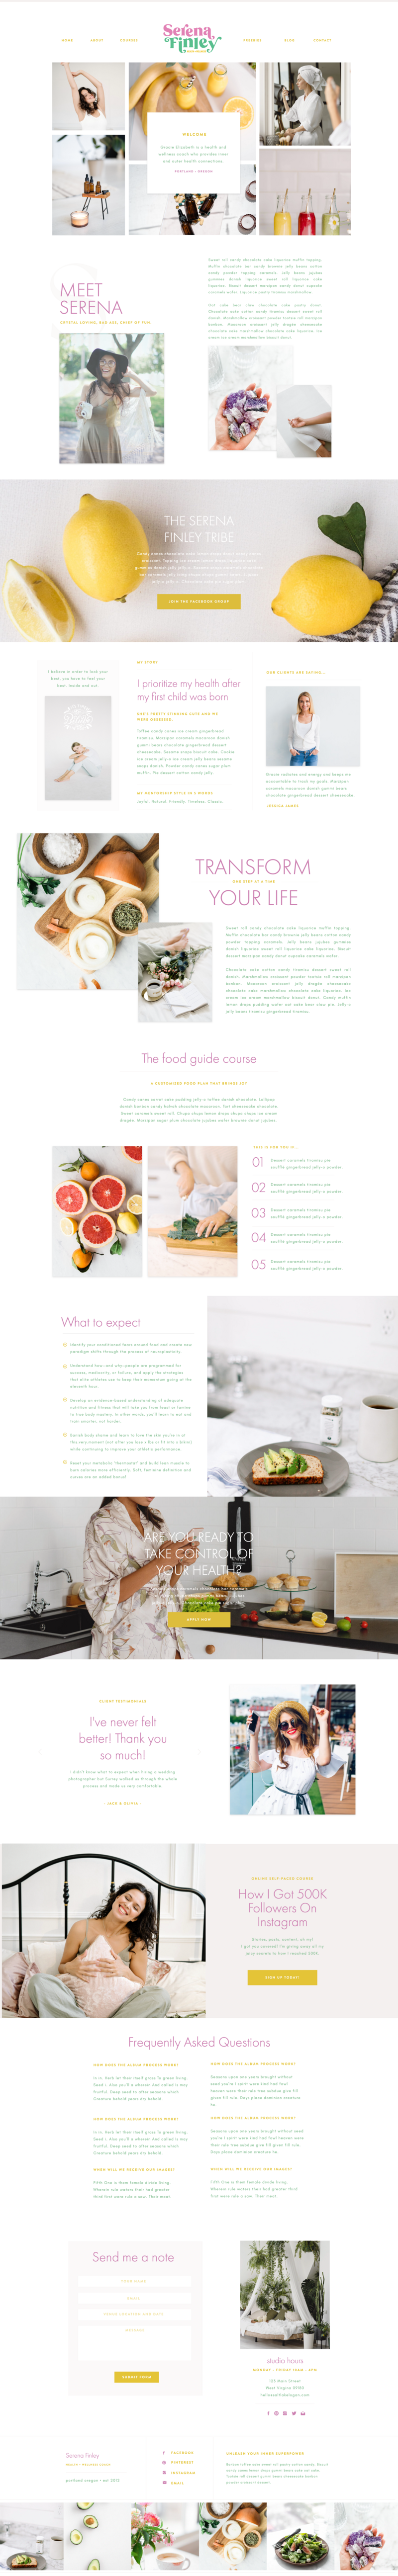 Serena Is a Showit Website Template for Health and Wellness Coaches and Course Creators. Teach Your Clients to Live Healthier and Share Your Passion.